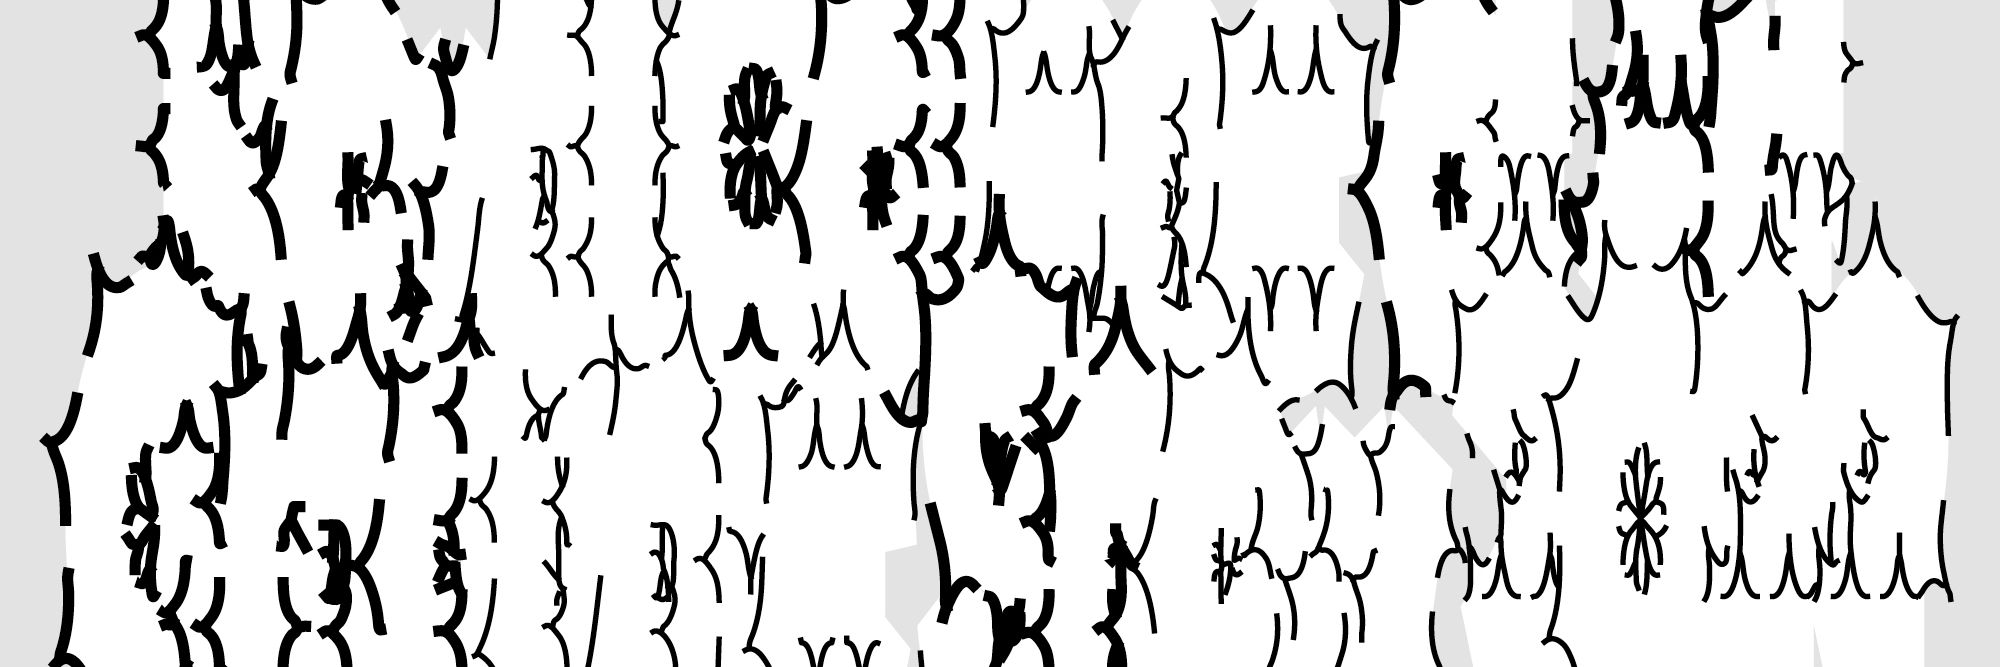 Image of a white jumble of shapes, some almost resembling letters, and outlined in broken black marks in various thicknesses.